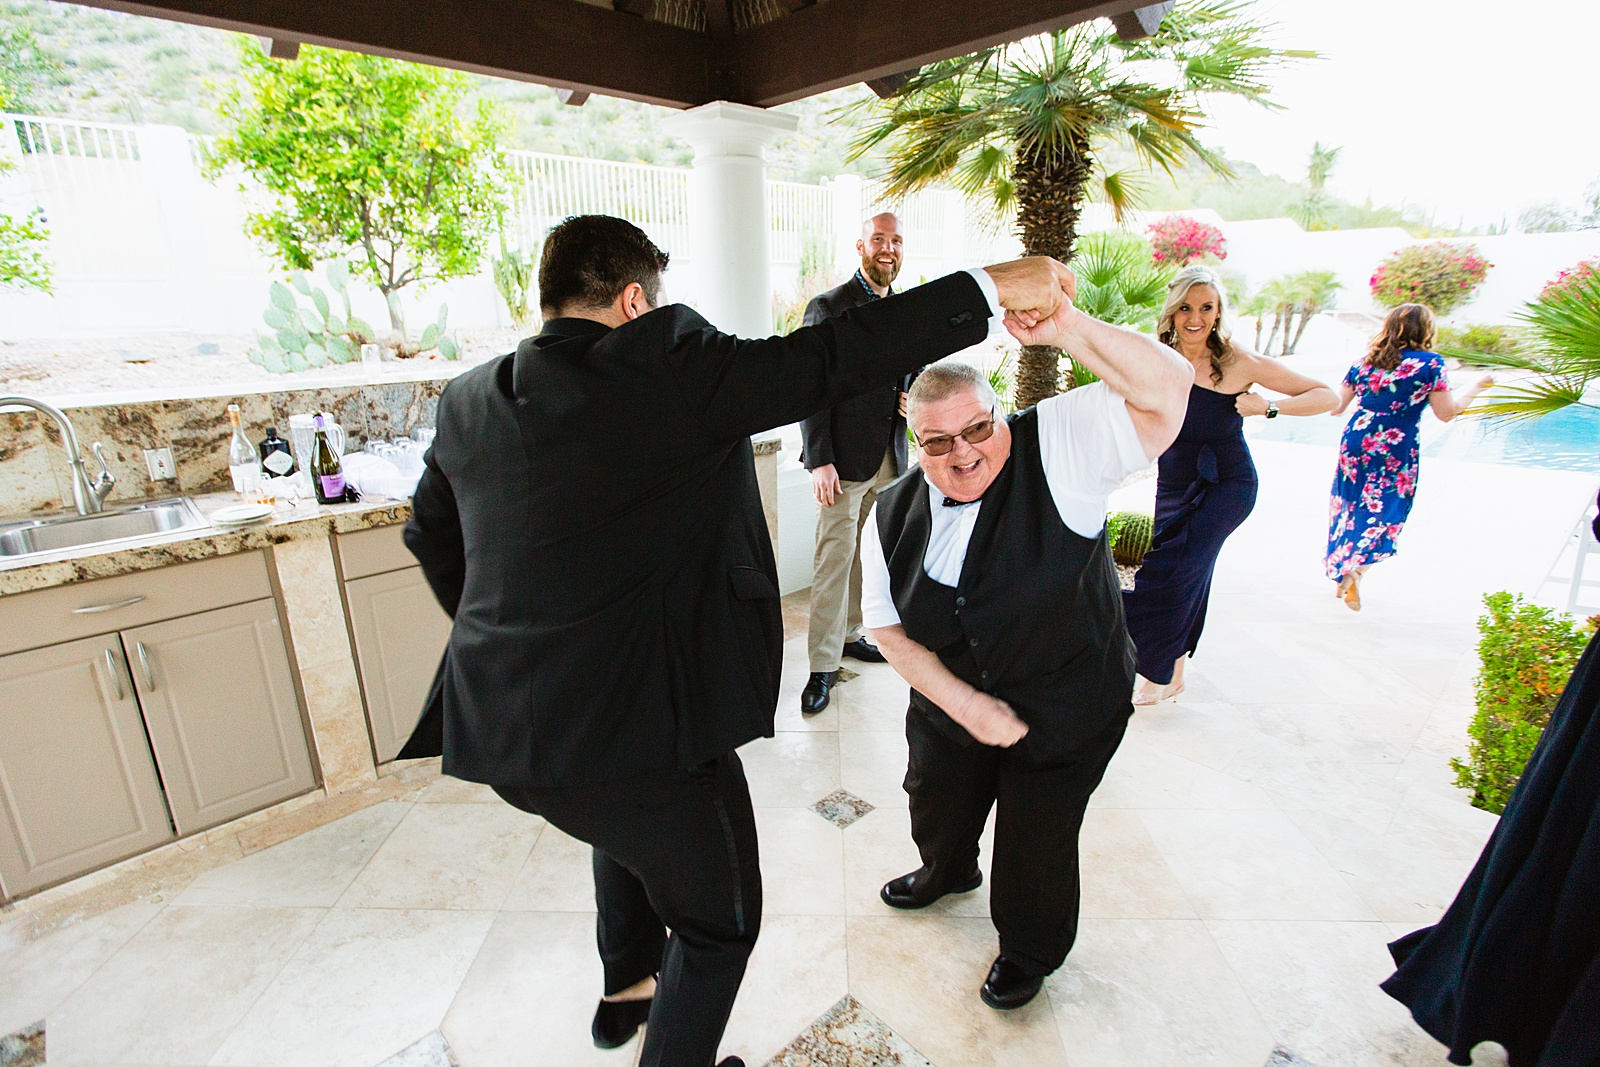 Guests dancing together at backyard wedding reception by Scottsdale wedding photographer PMA Photography